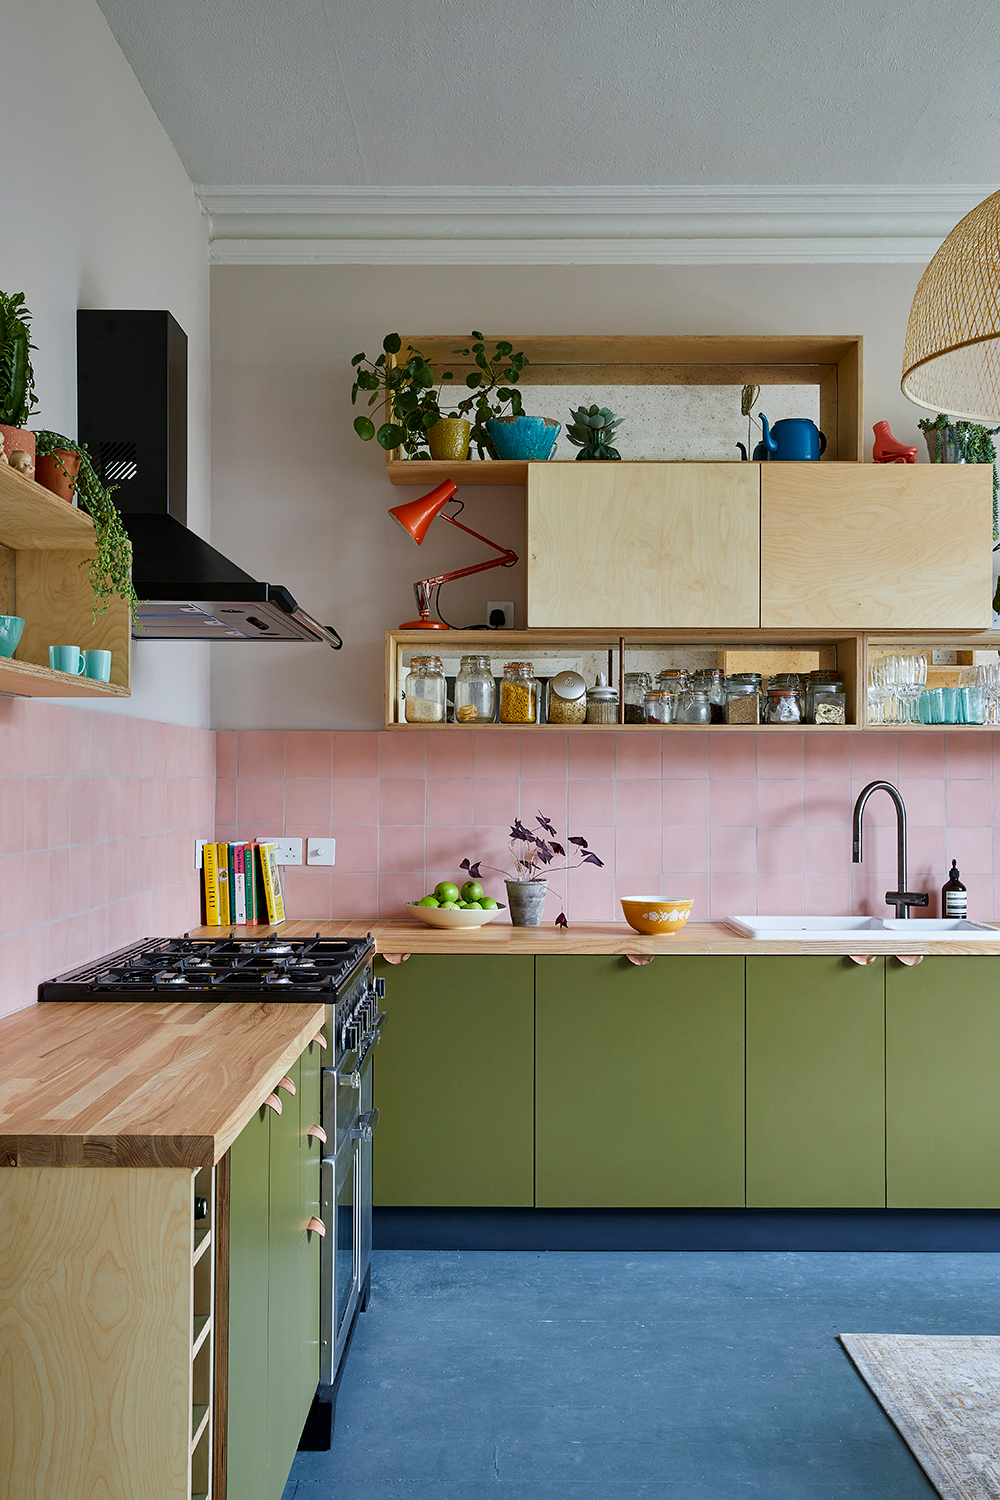 How to Choose the Perfect Kitchen Color
Palette